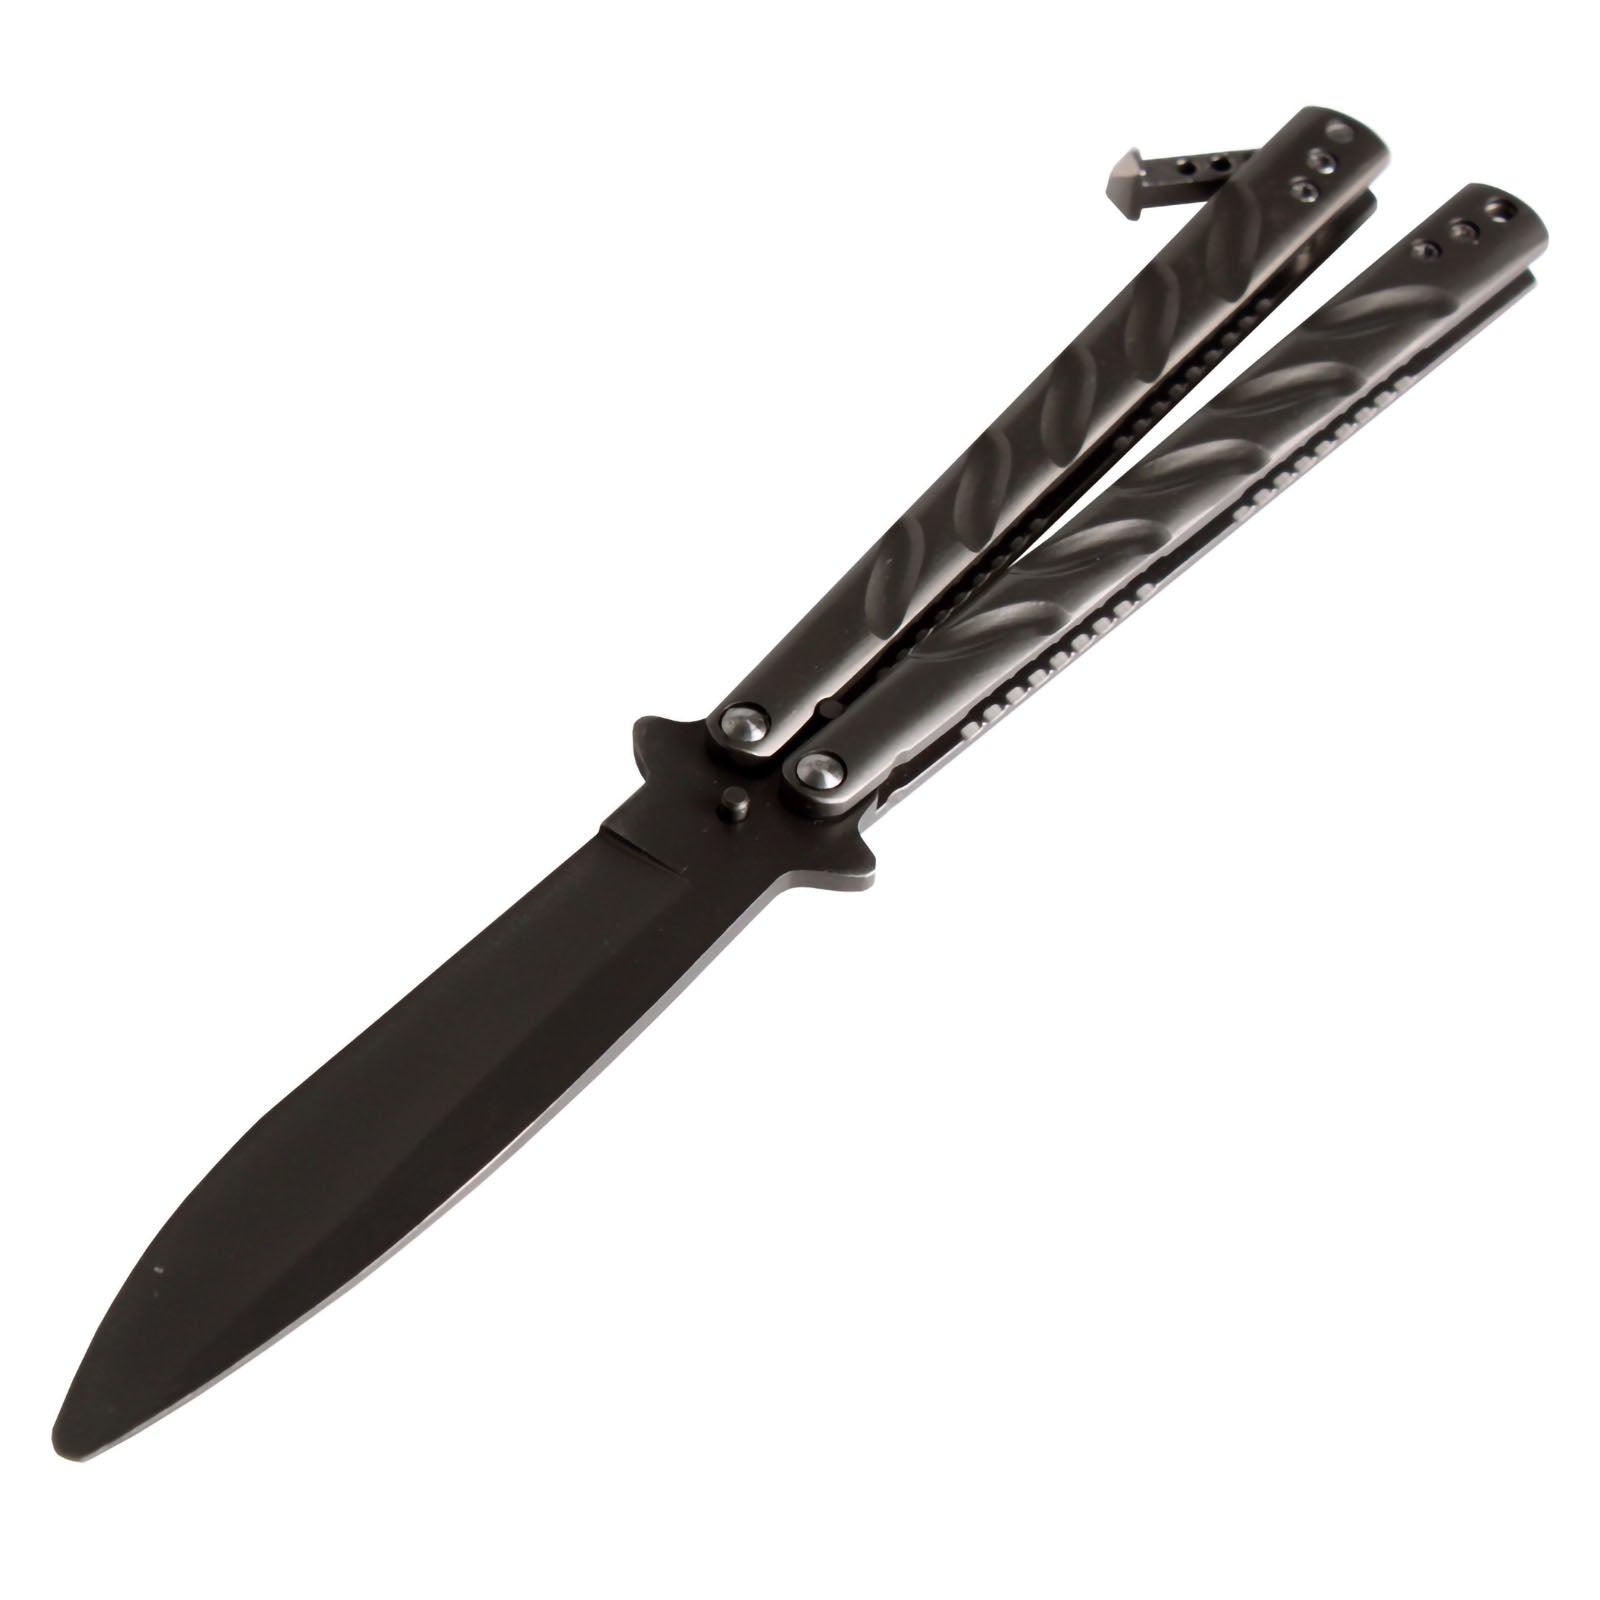 Andux Balisong Practice Trainer CS/HDD21 (Dark Gray)(ONLY Available in EU Countries)